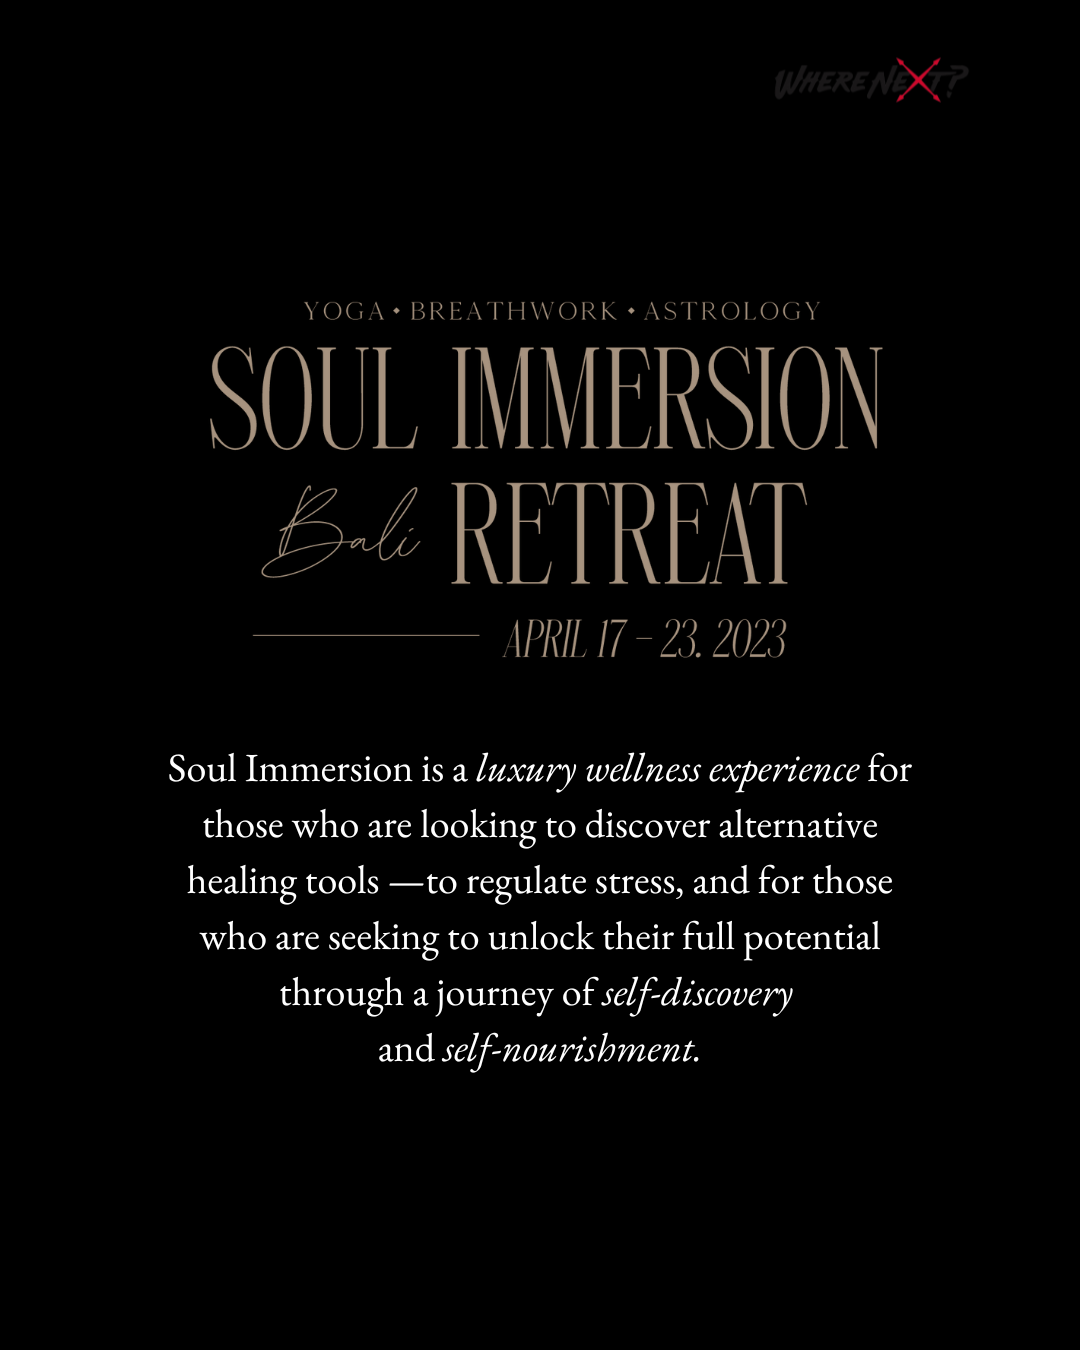 Nahal's Soul Immersion Retreat